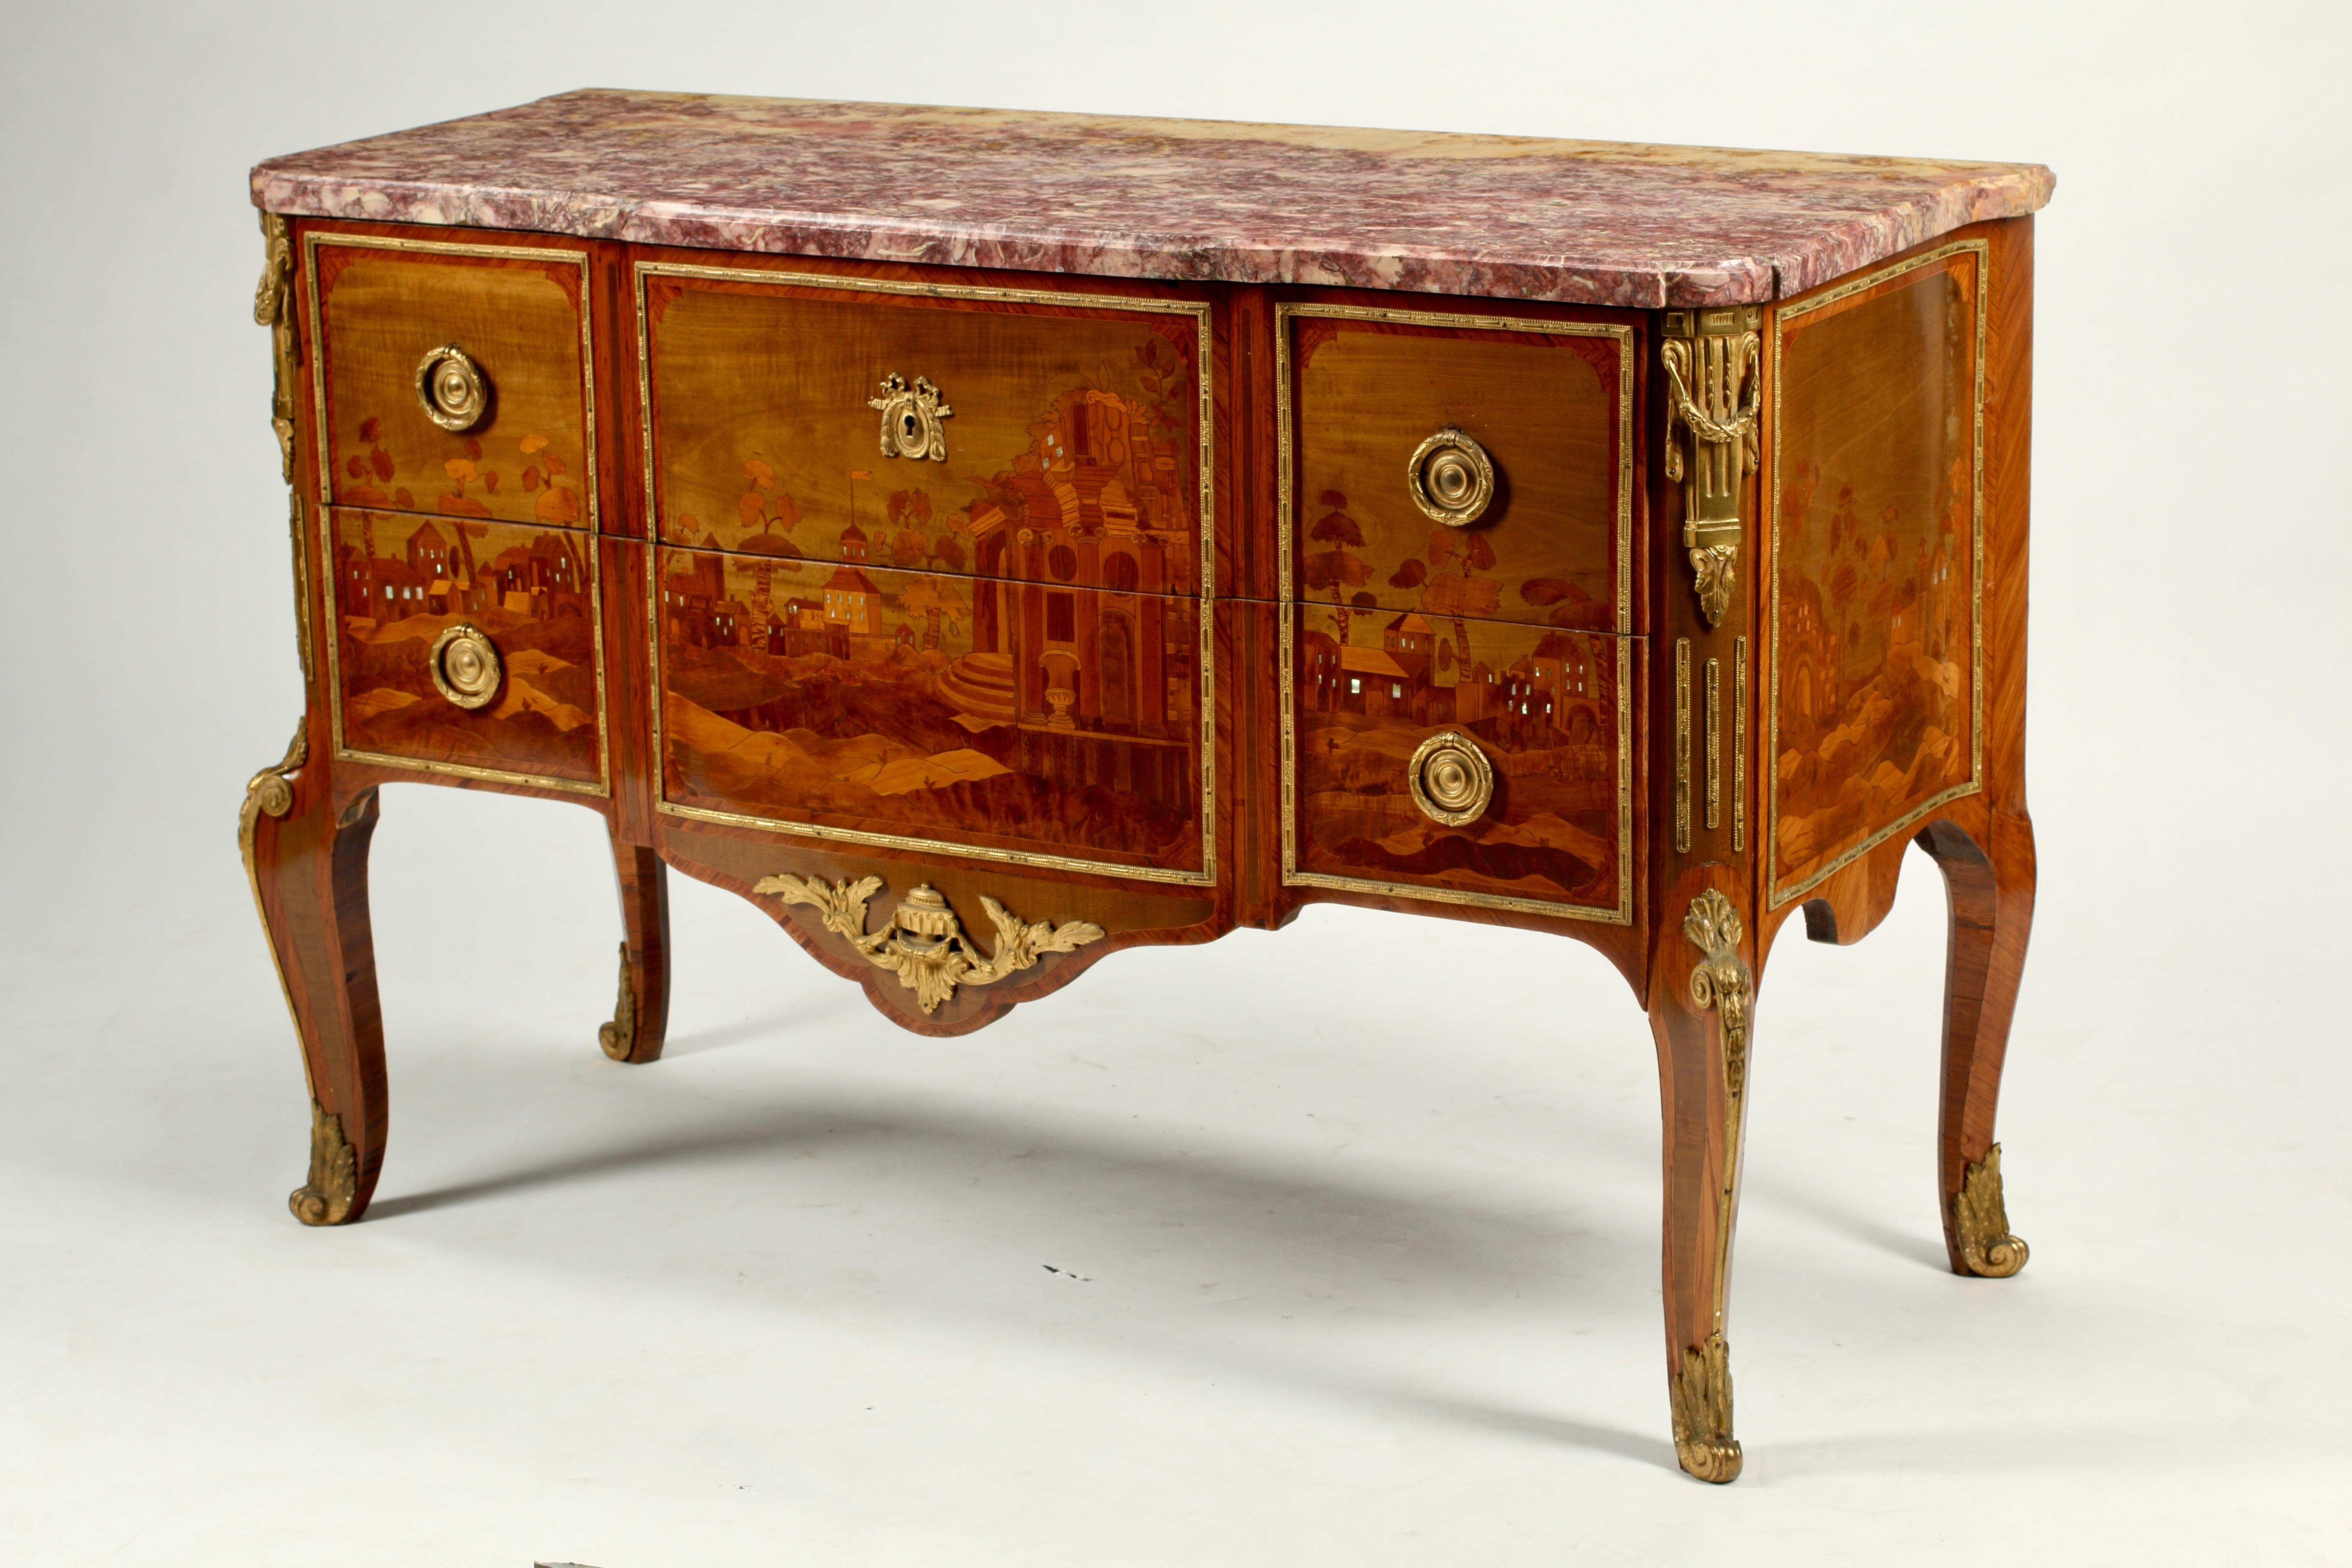 An exquisite French Louis XV-XVI transitional style commode with dore bronze ormolu mounts and original marble top. 
The fine marquetry depicting a townscape was crafted from the most beautiful exotic fruitwood and mother of pearl inlay in the